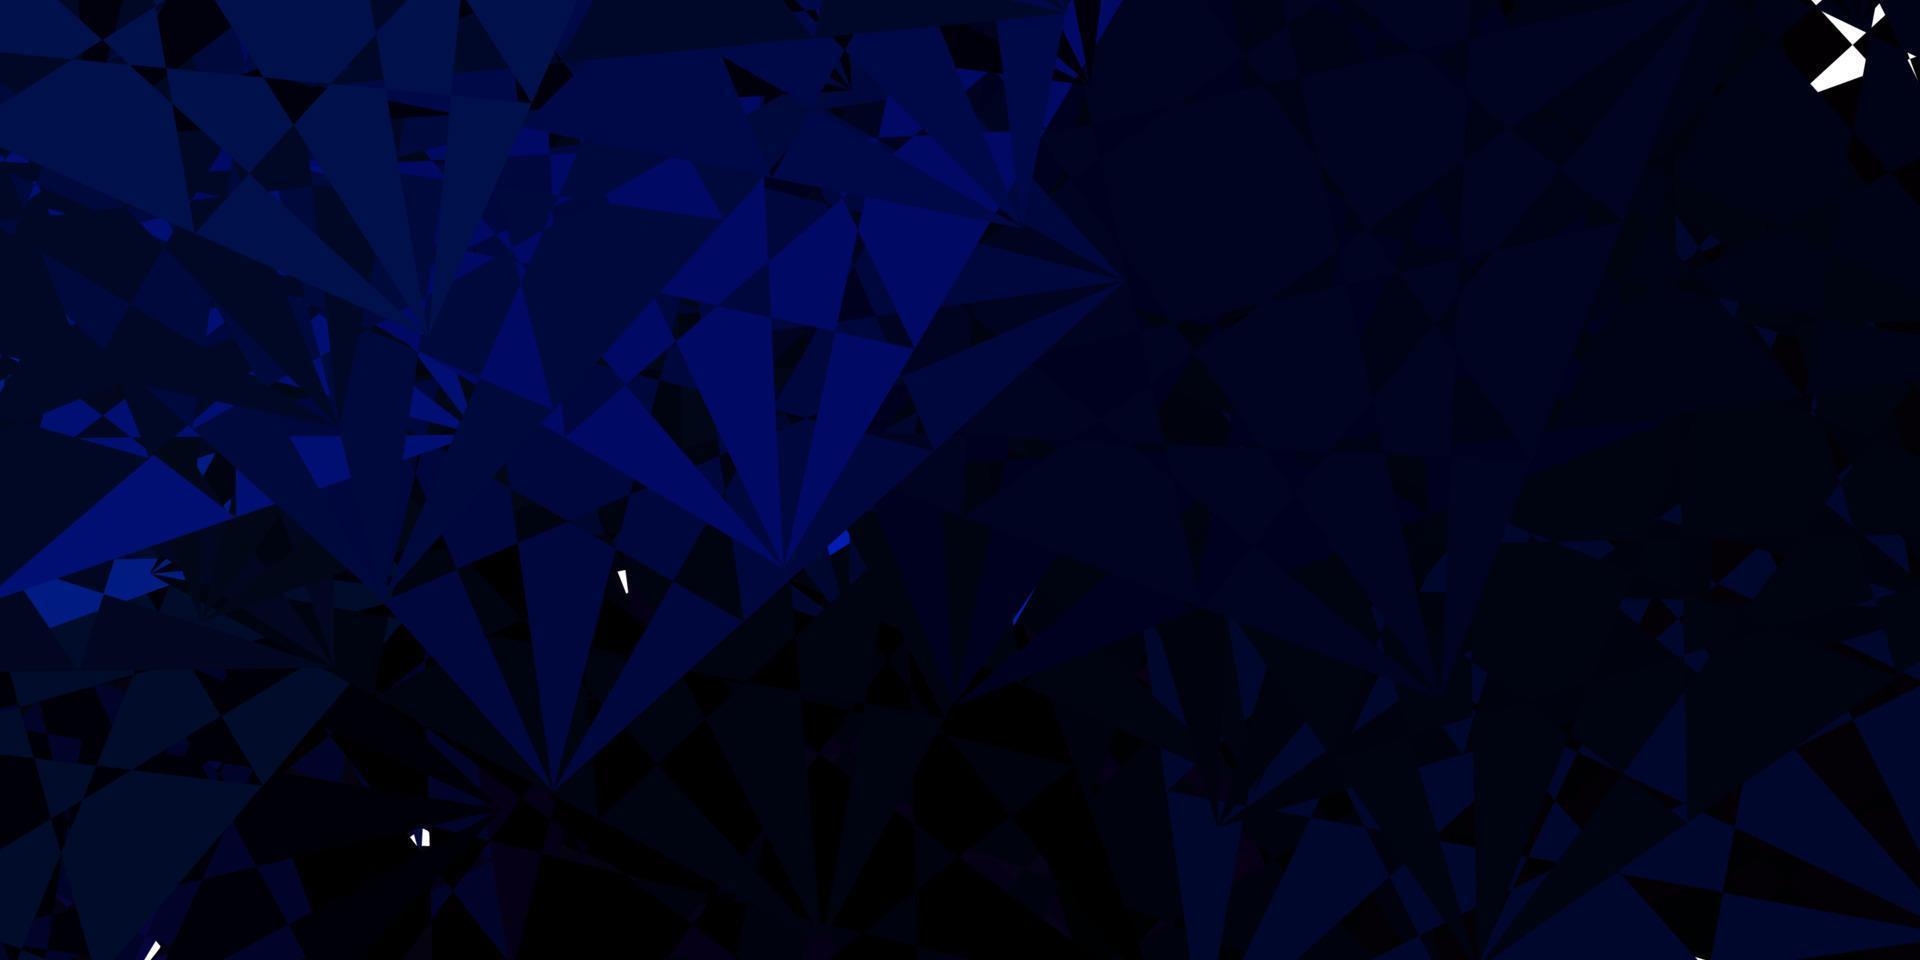 Dark BLUE vector pattern with abstract shapes.